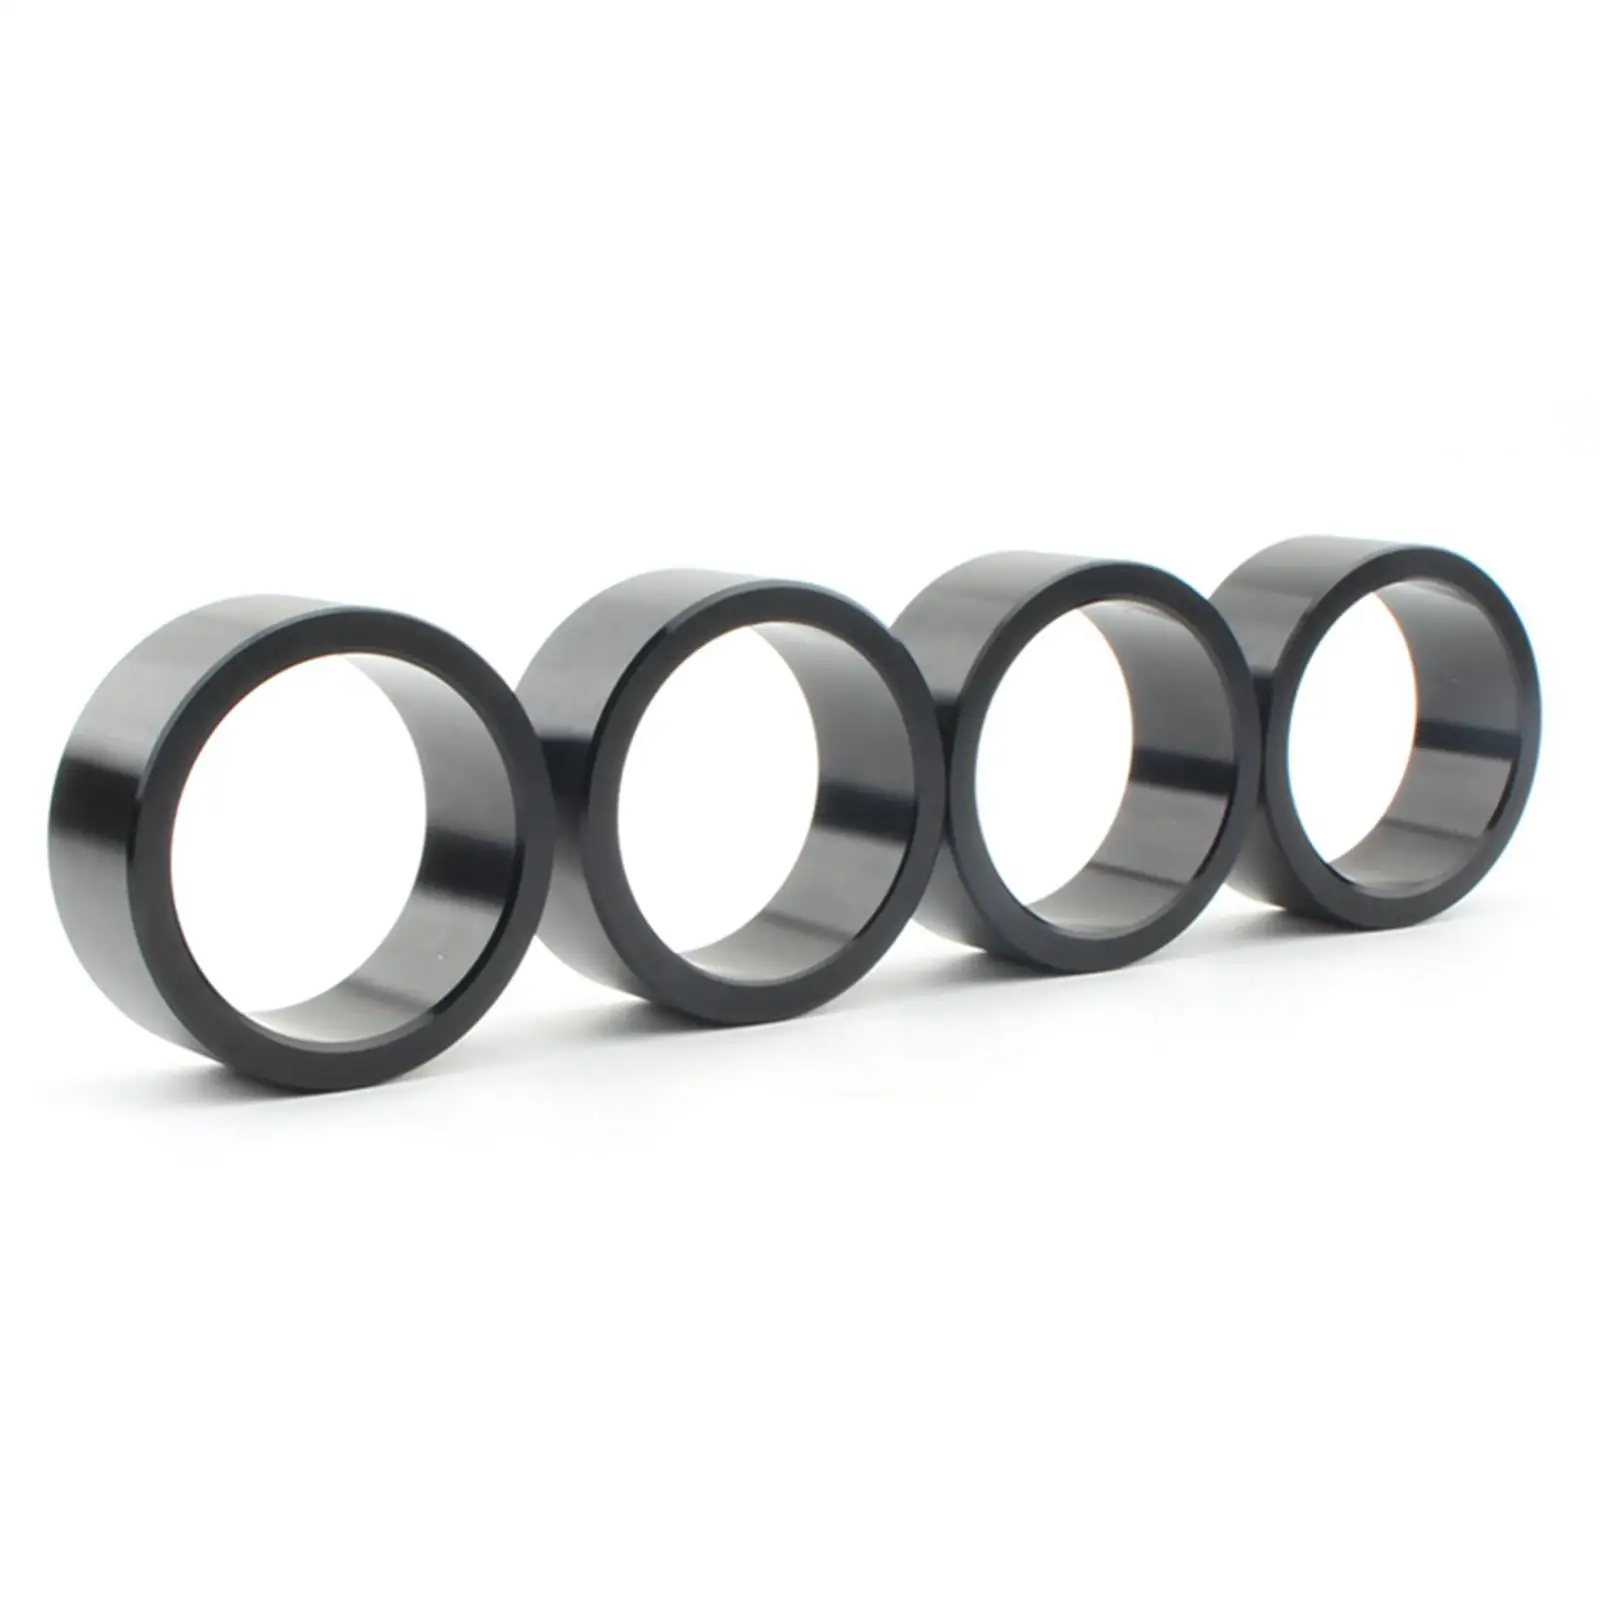 Aluminum Alloy Lift Spacers 2.5 Inch*4,Front  Spacer Kit for  Rancher 230 250 300 350 400 420